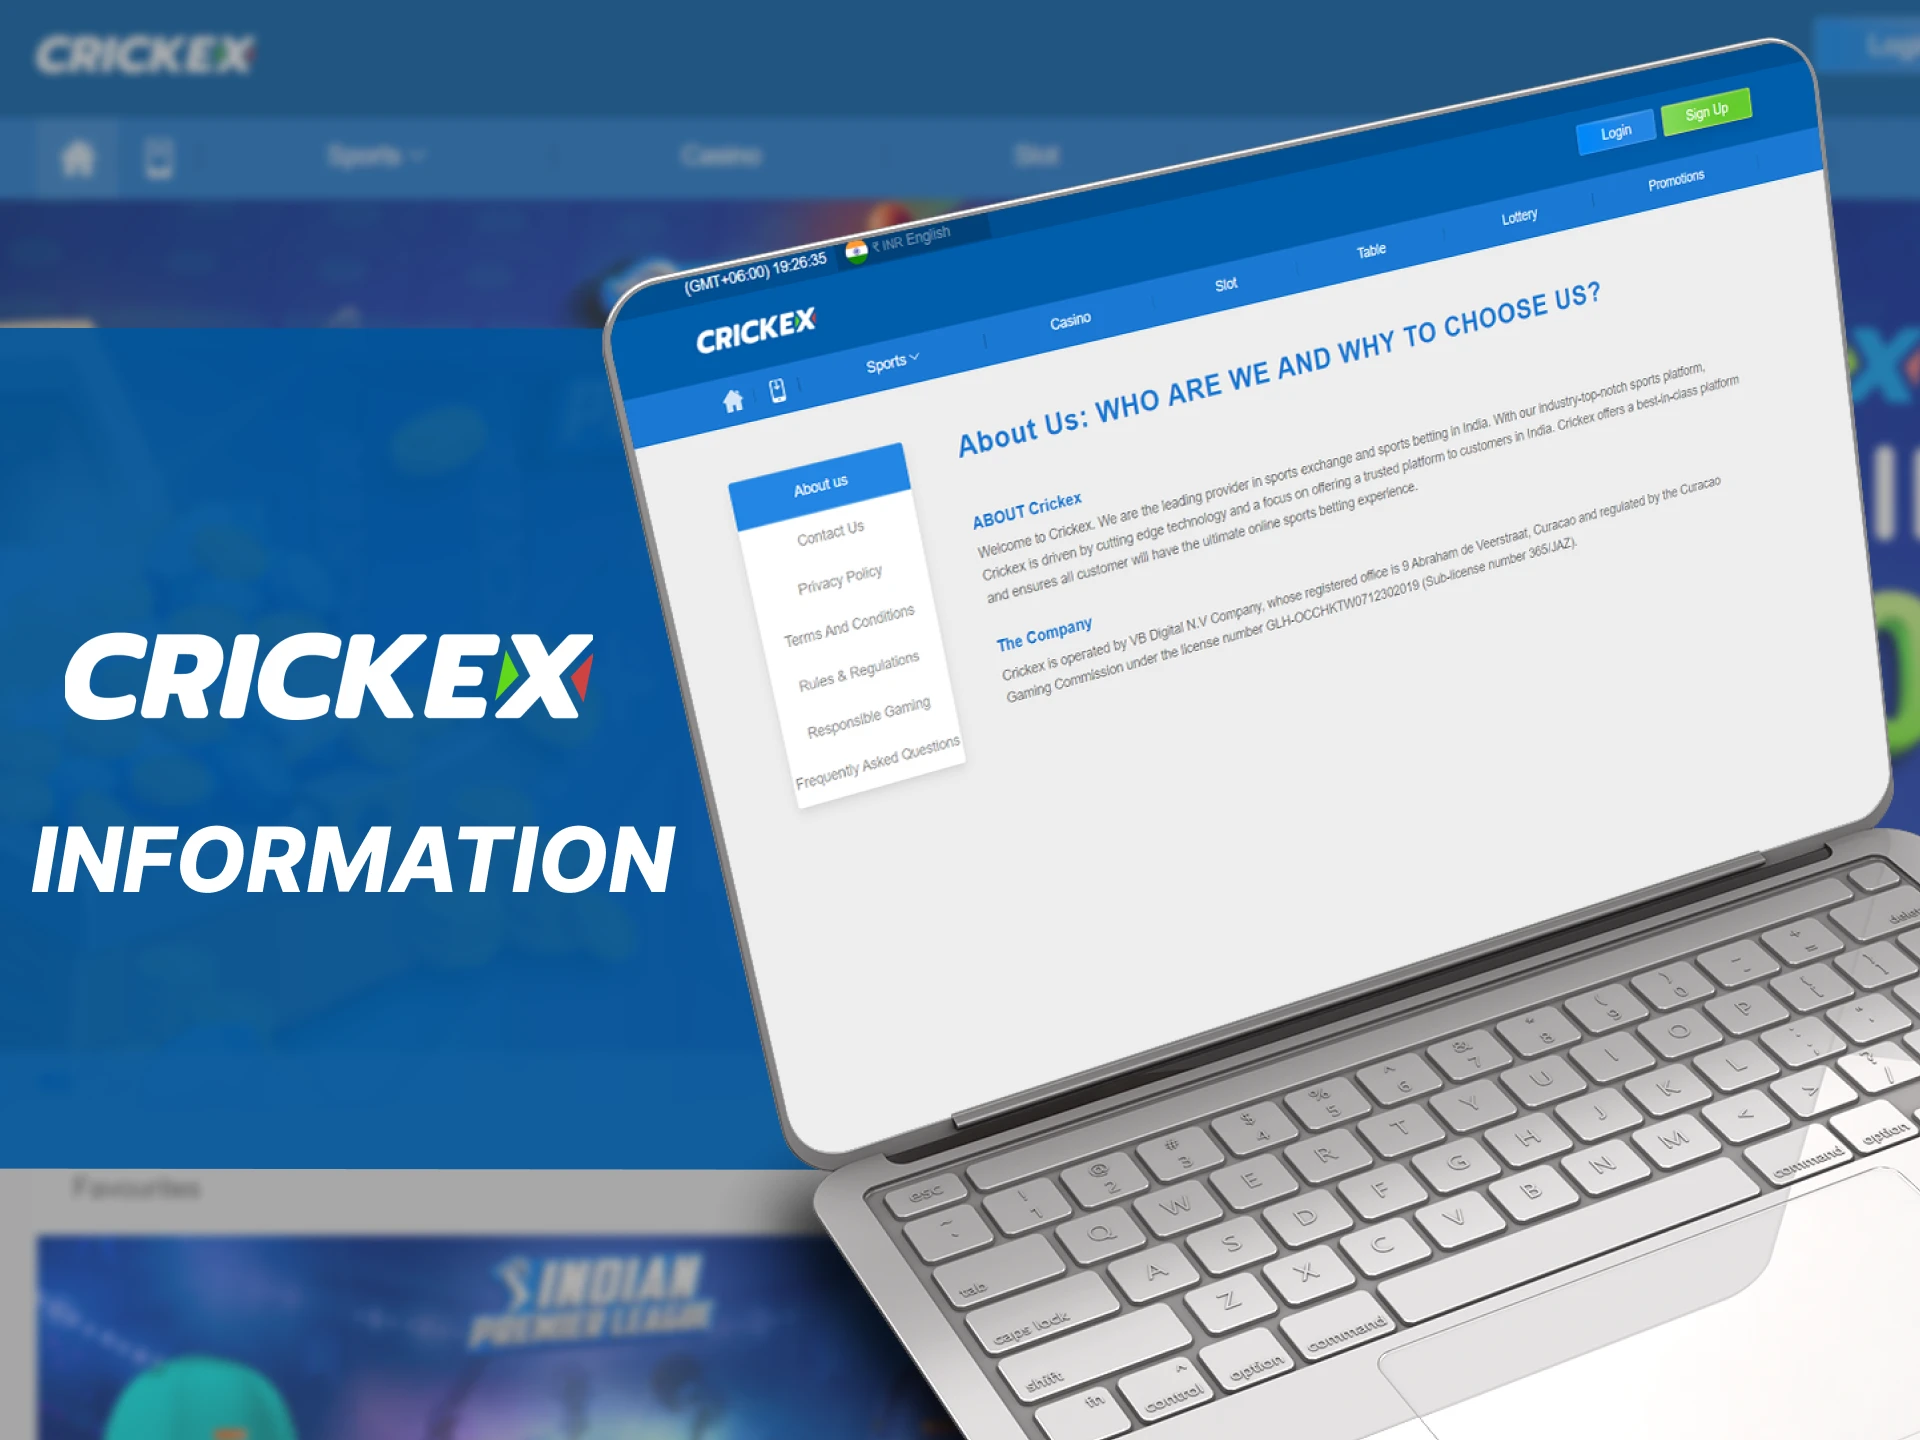 Learn all about the Crickex team and service.